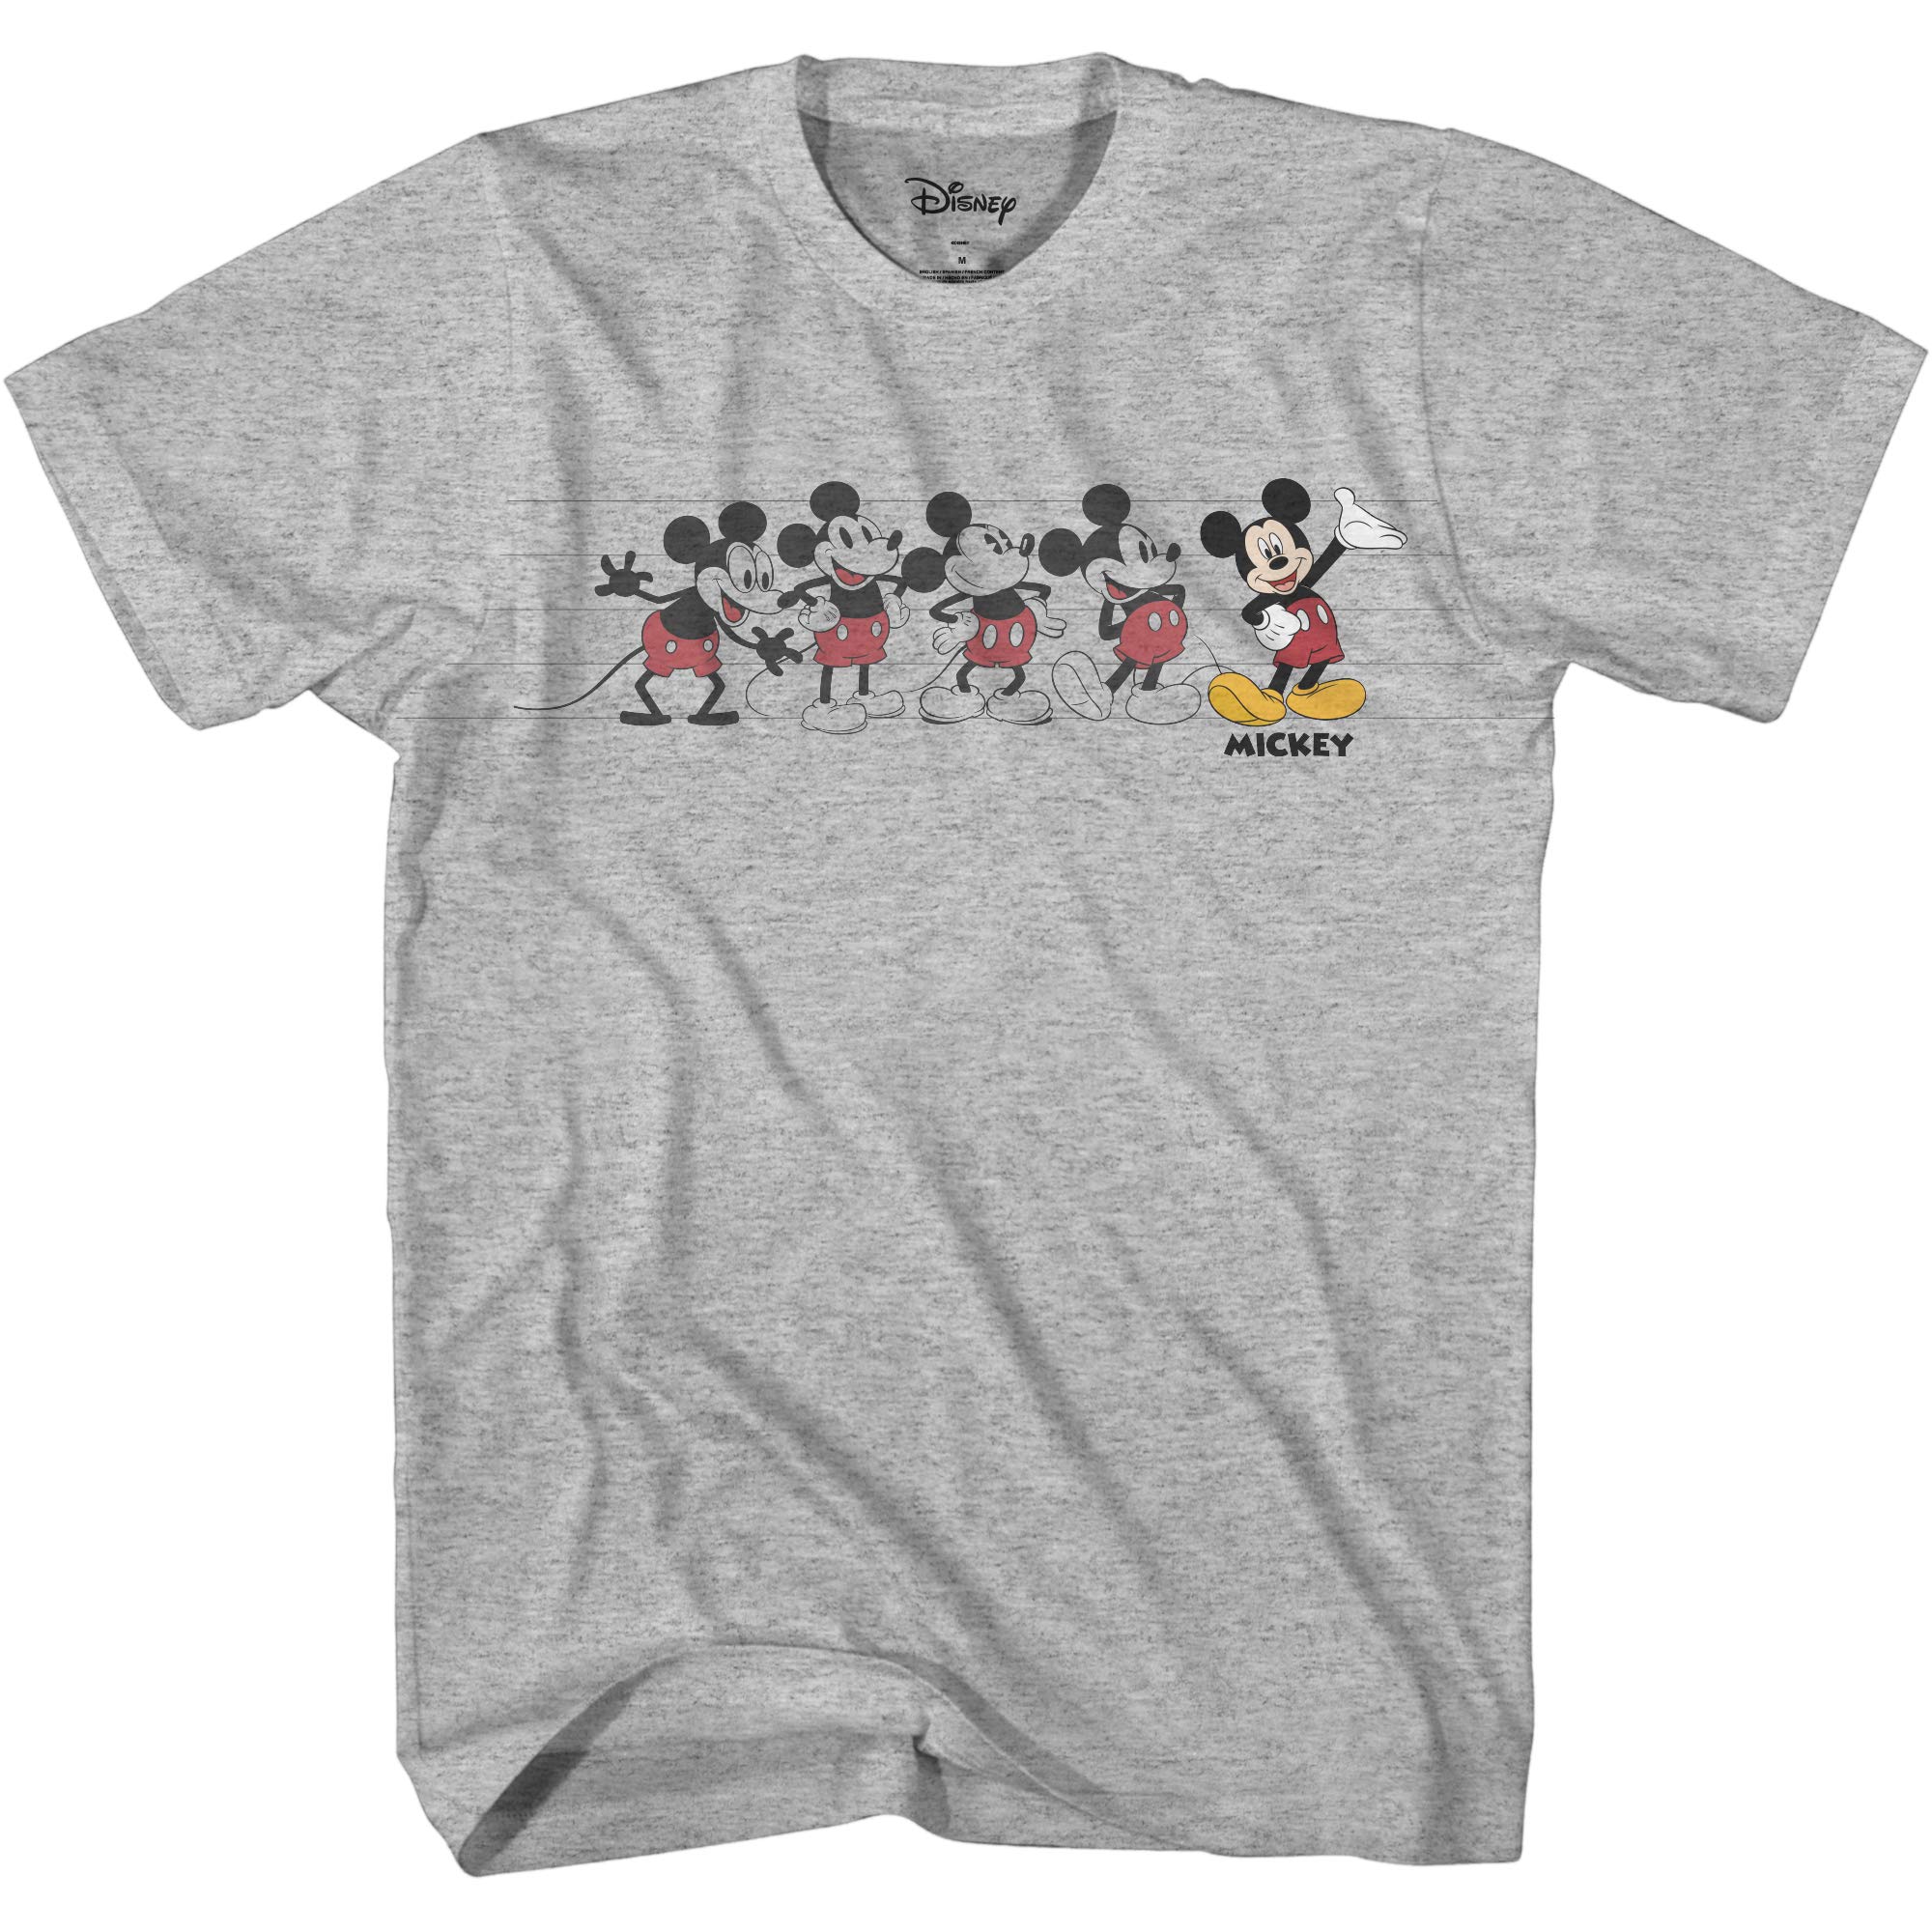 Book Cover Mickey Mouse Graphic Tee Classic Vintage Disneyland World Adult Tee Graphic T-Shirt for Men Tshirt Clothing Apparel Heather Grey Small